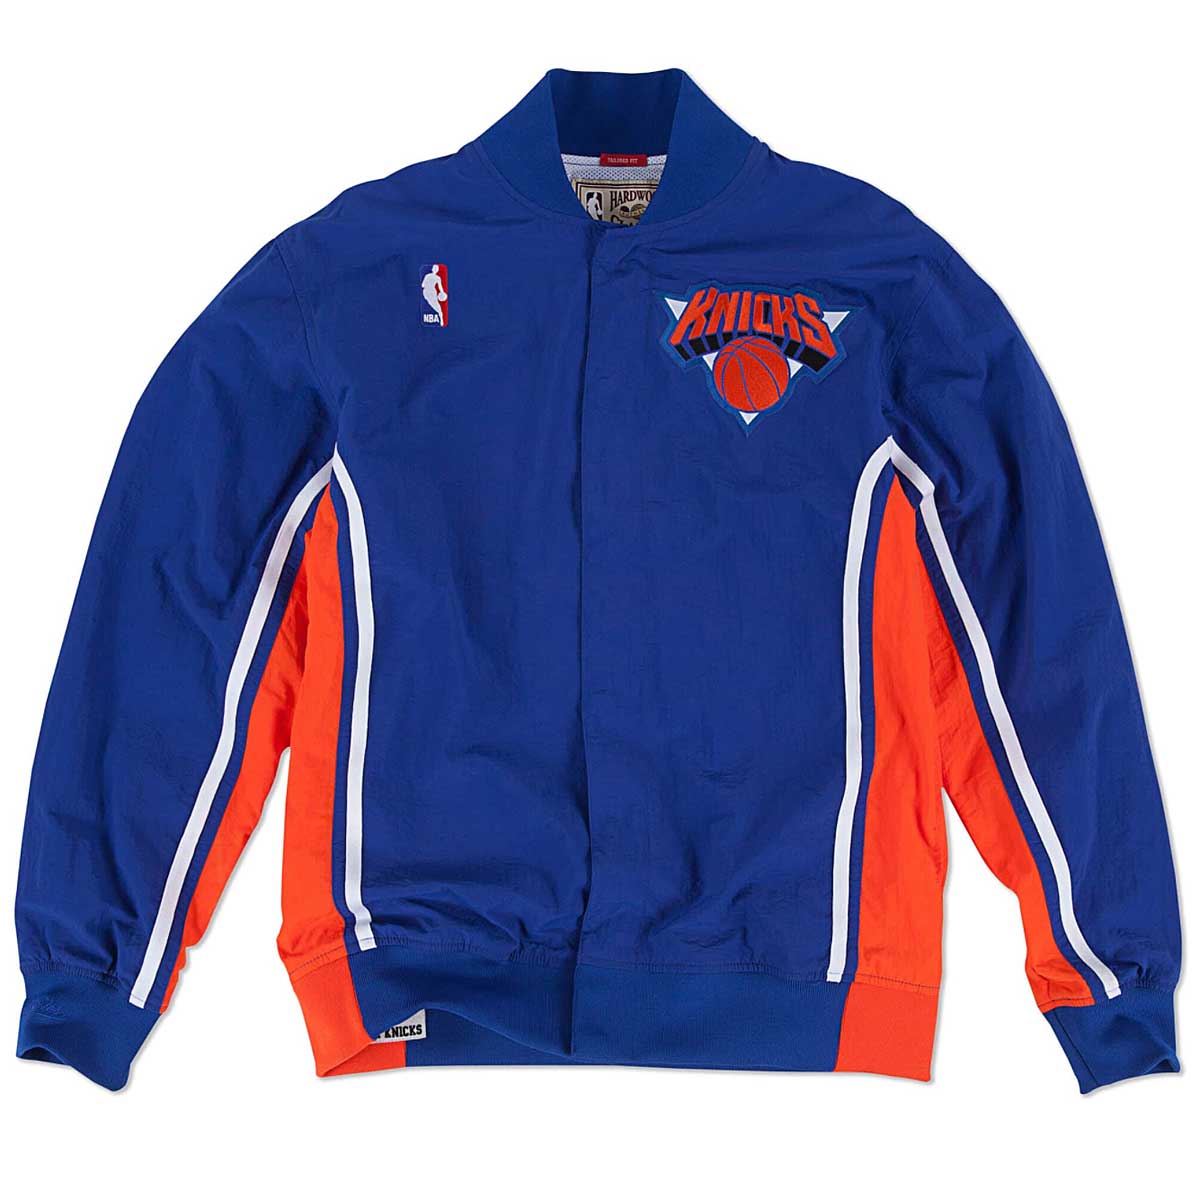 Mitchell And Ness Nba New York Knicks Authentic Warm Up Jacket, Royal Blue